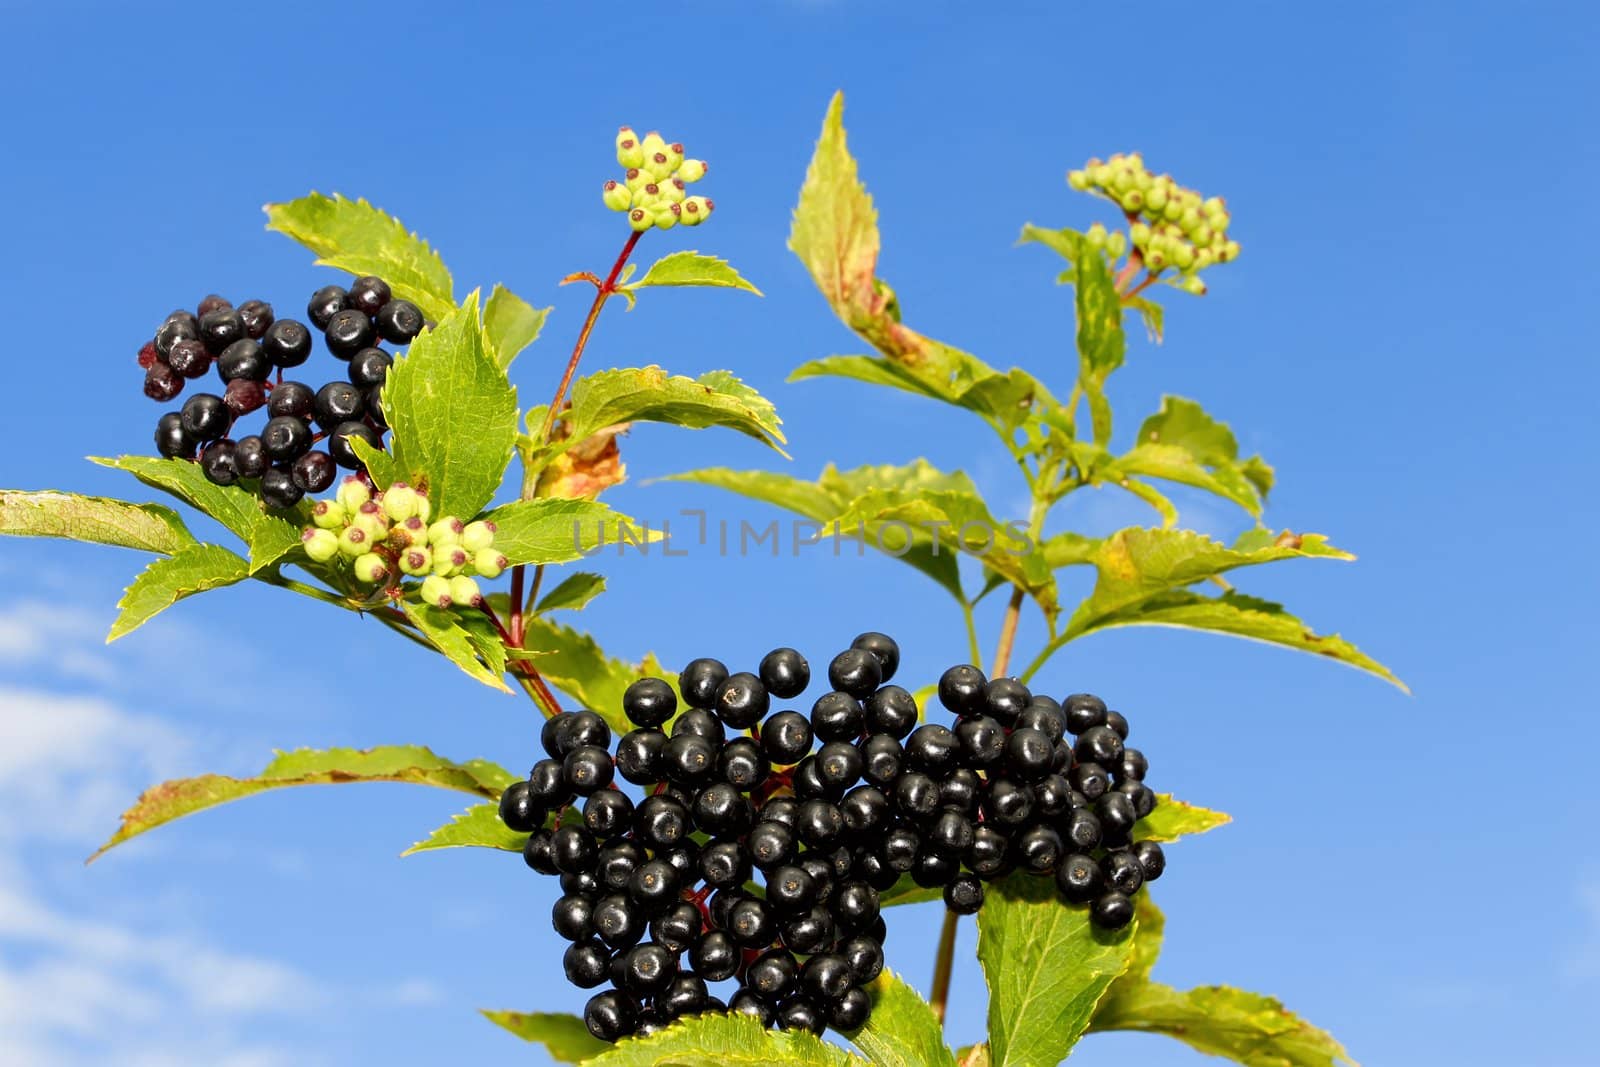 Elder branch with ripe and immature berries against blue sky